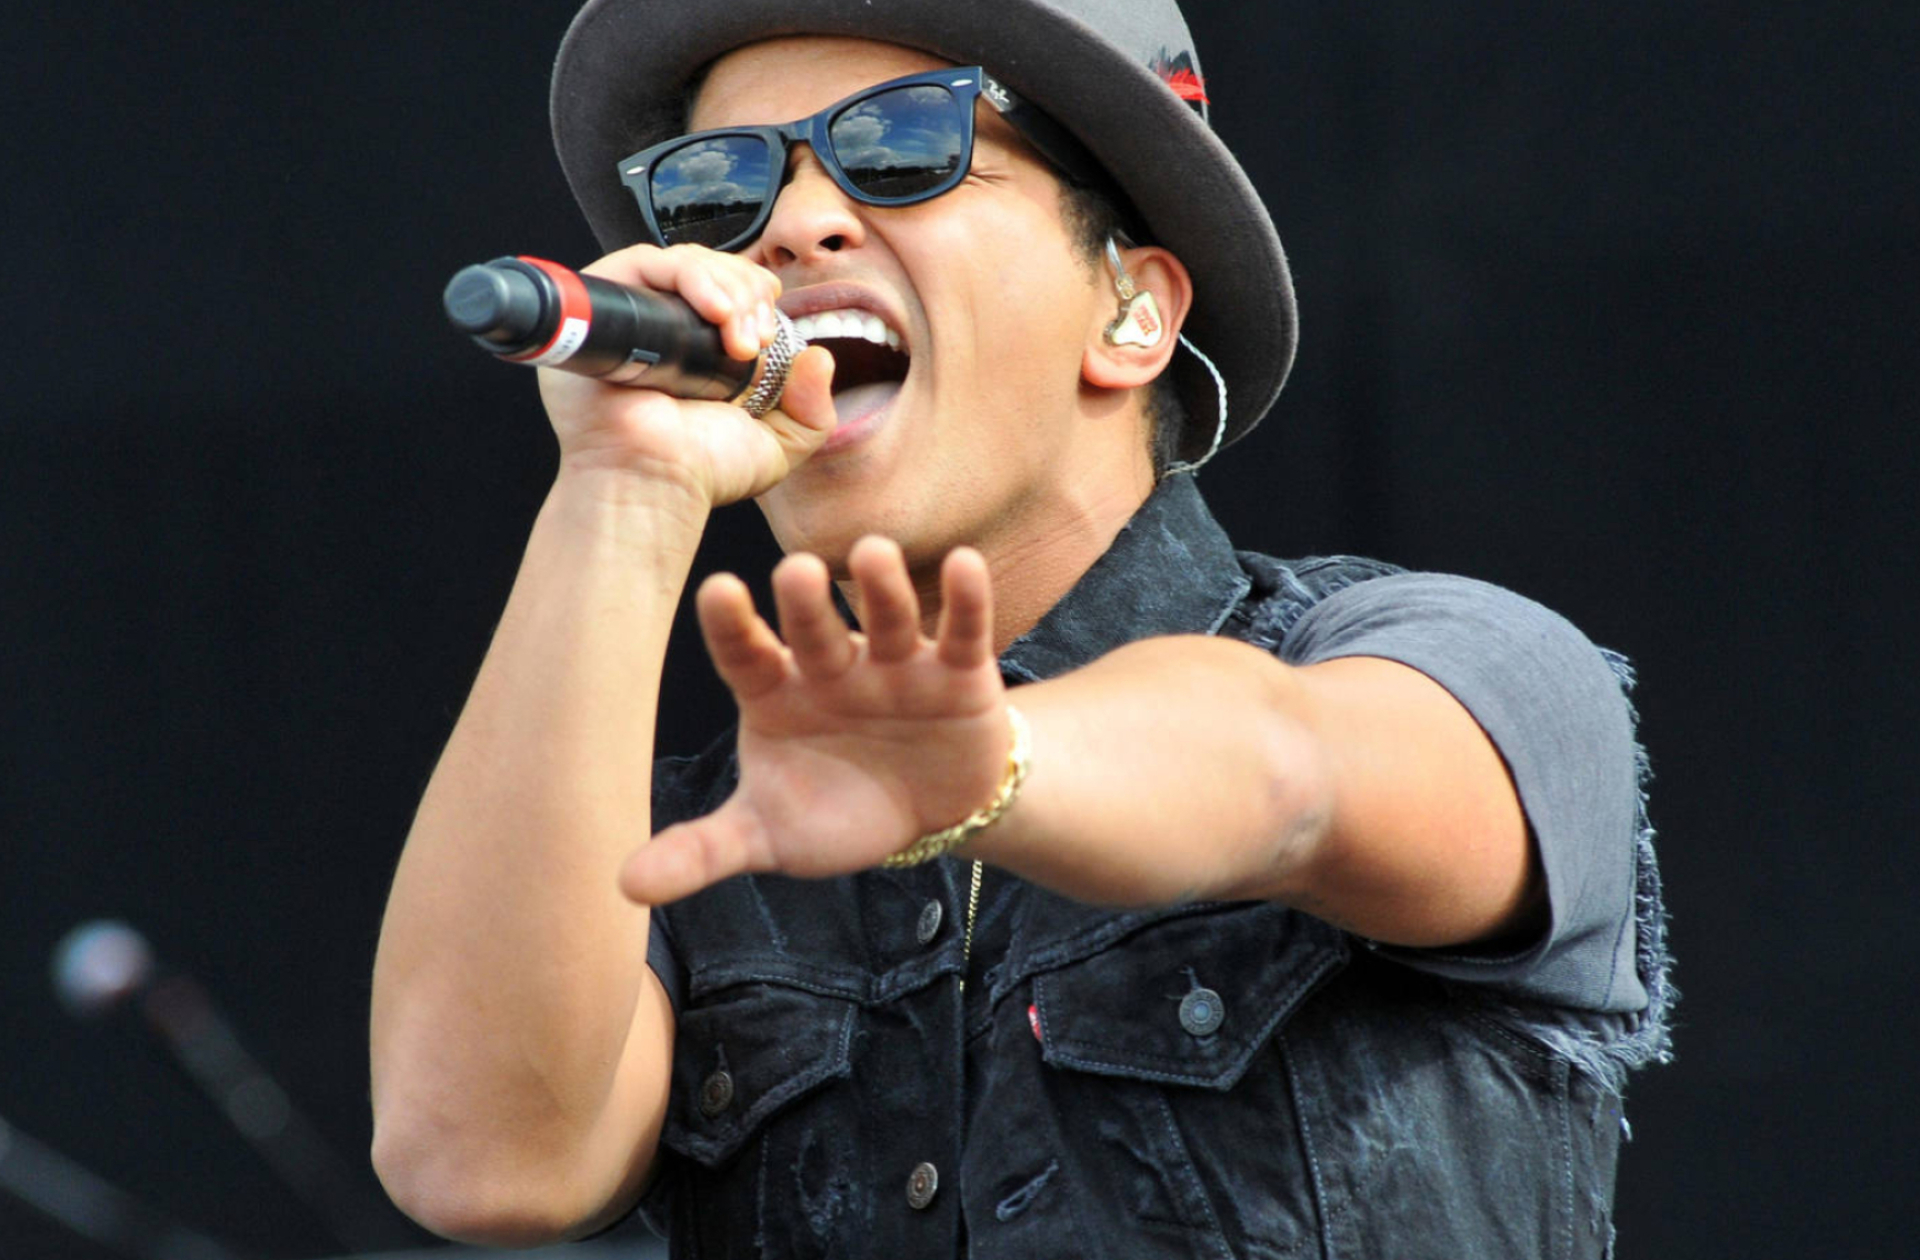 Bruno Mars wallpapers, High-quality images, Stylish backgrounds, Free download, 1920x1260 HD Desktop